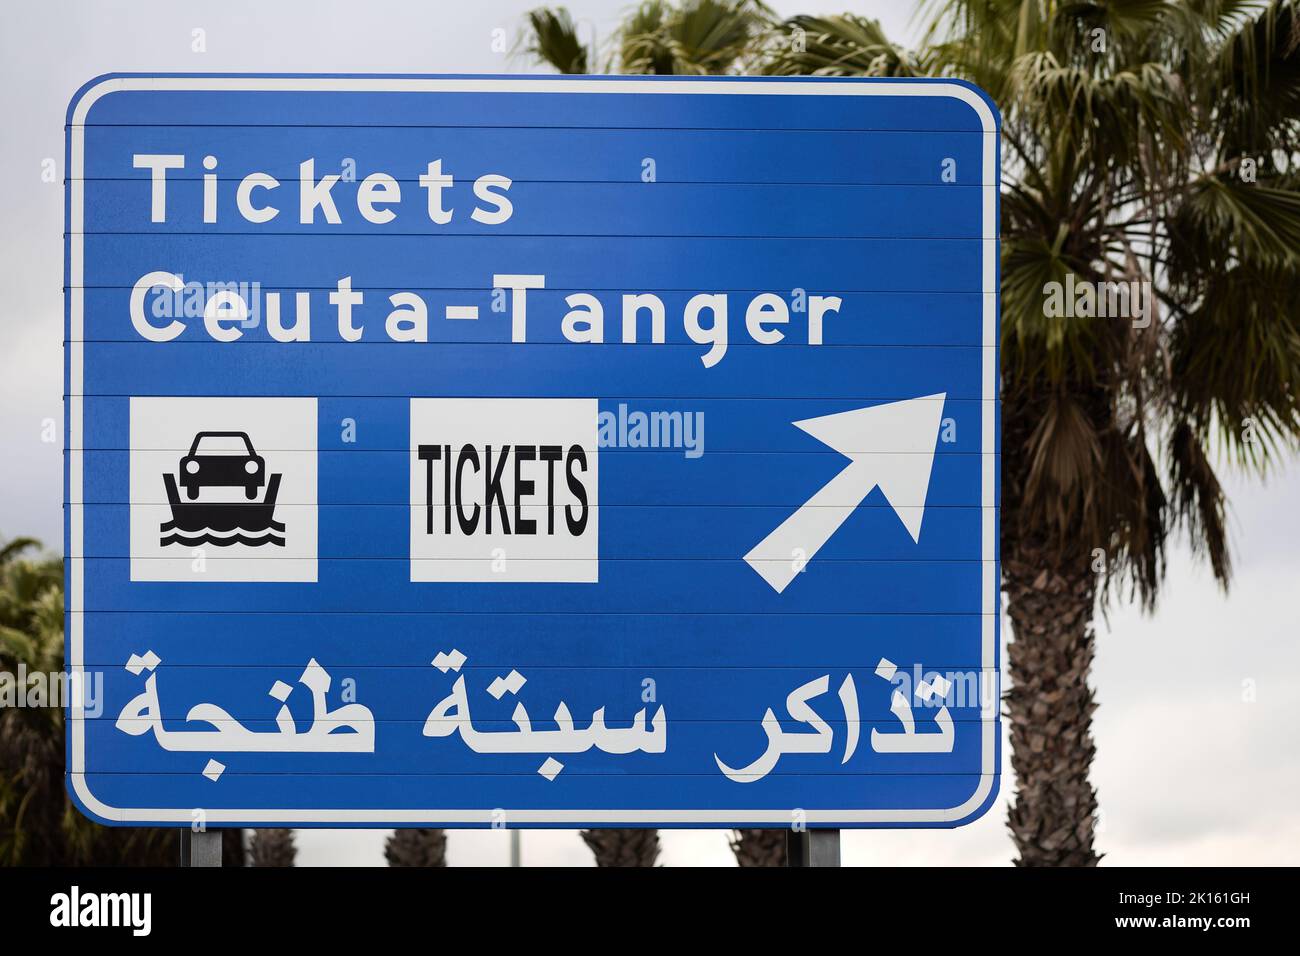 Ceuta tanger road traffic sign for car ferry boat ticket tickets spain with arabic lettering Stock Photo